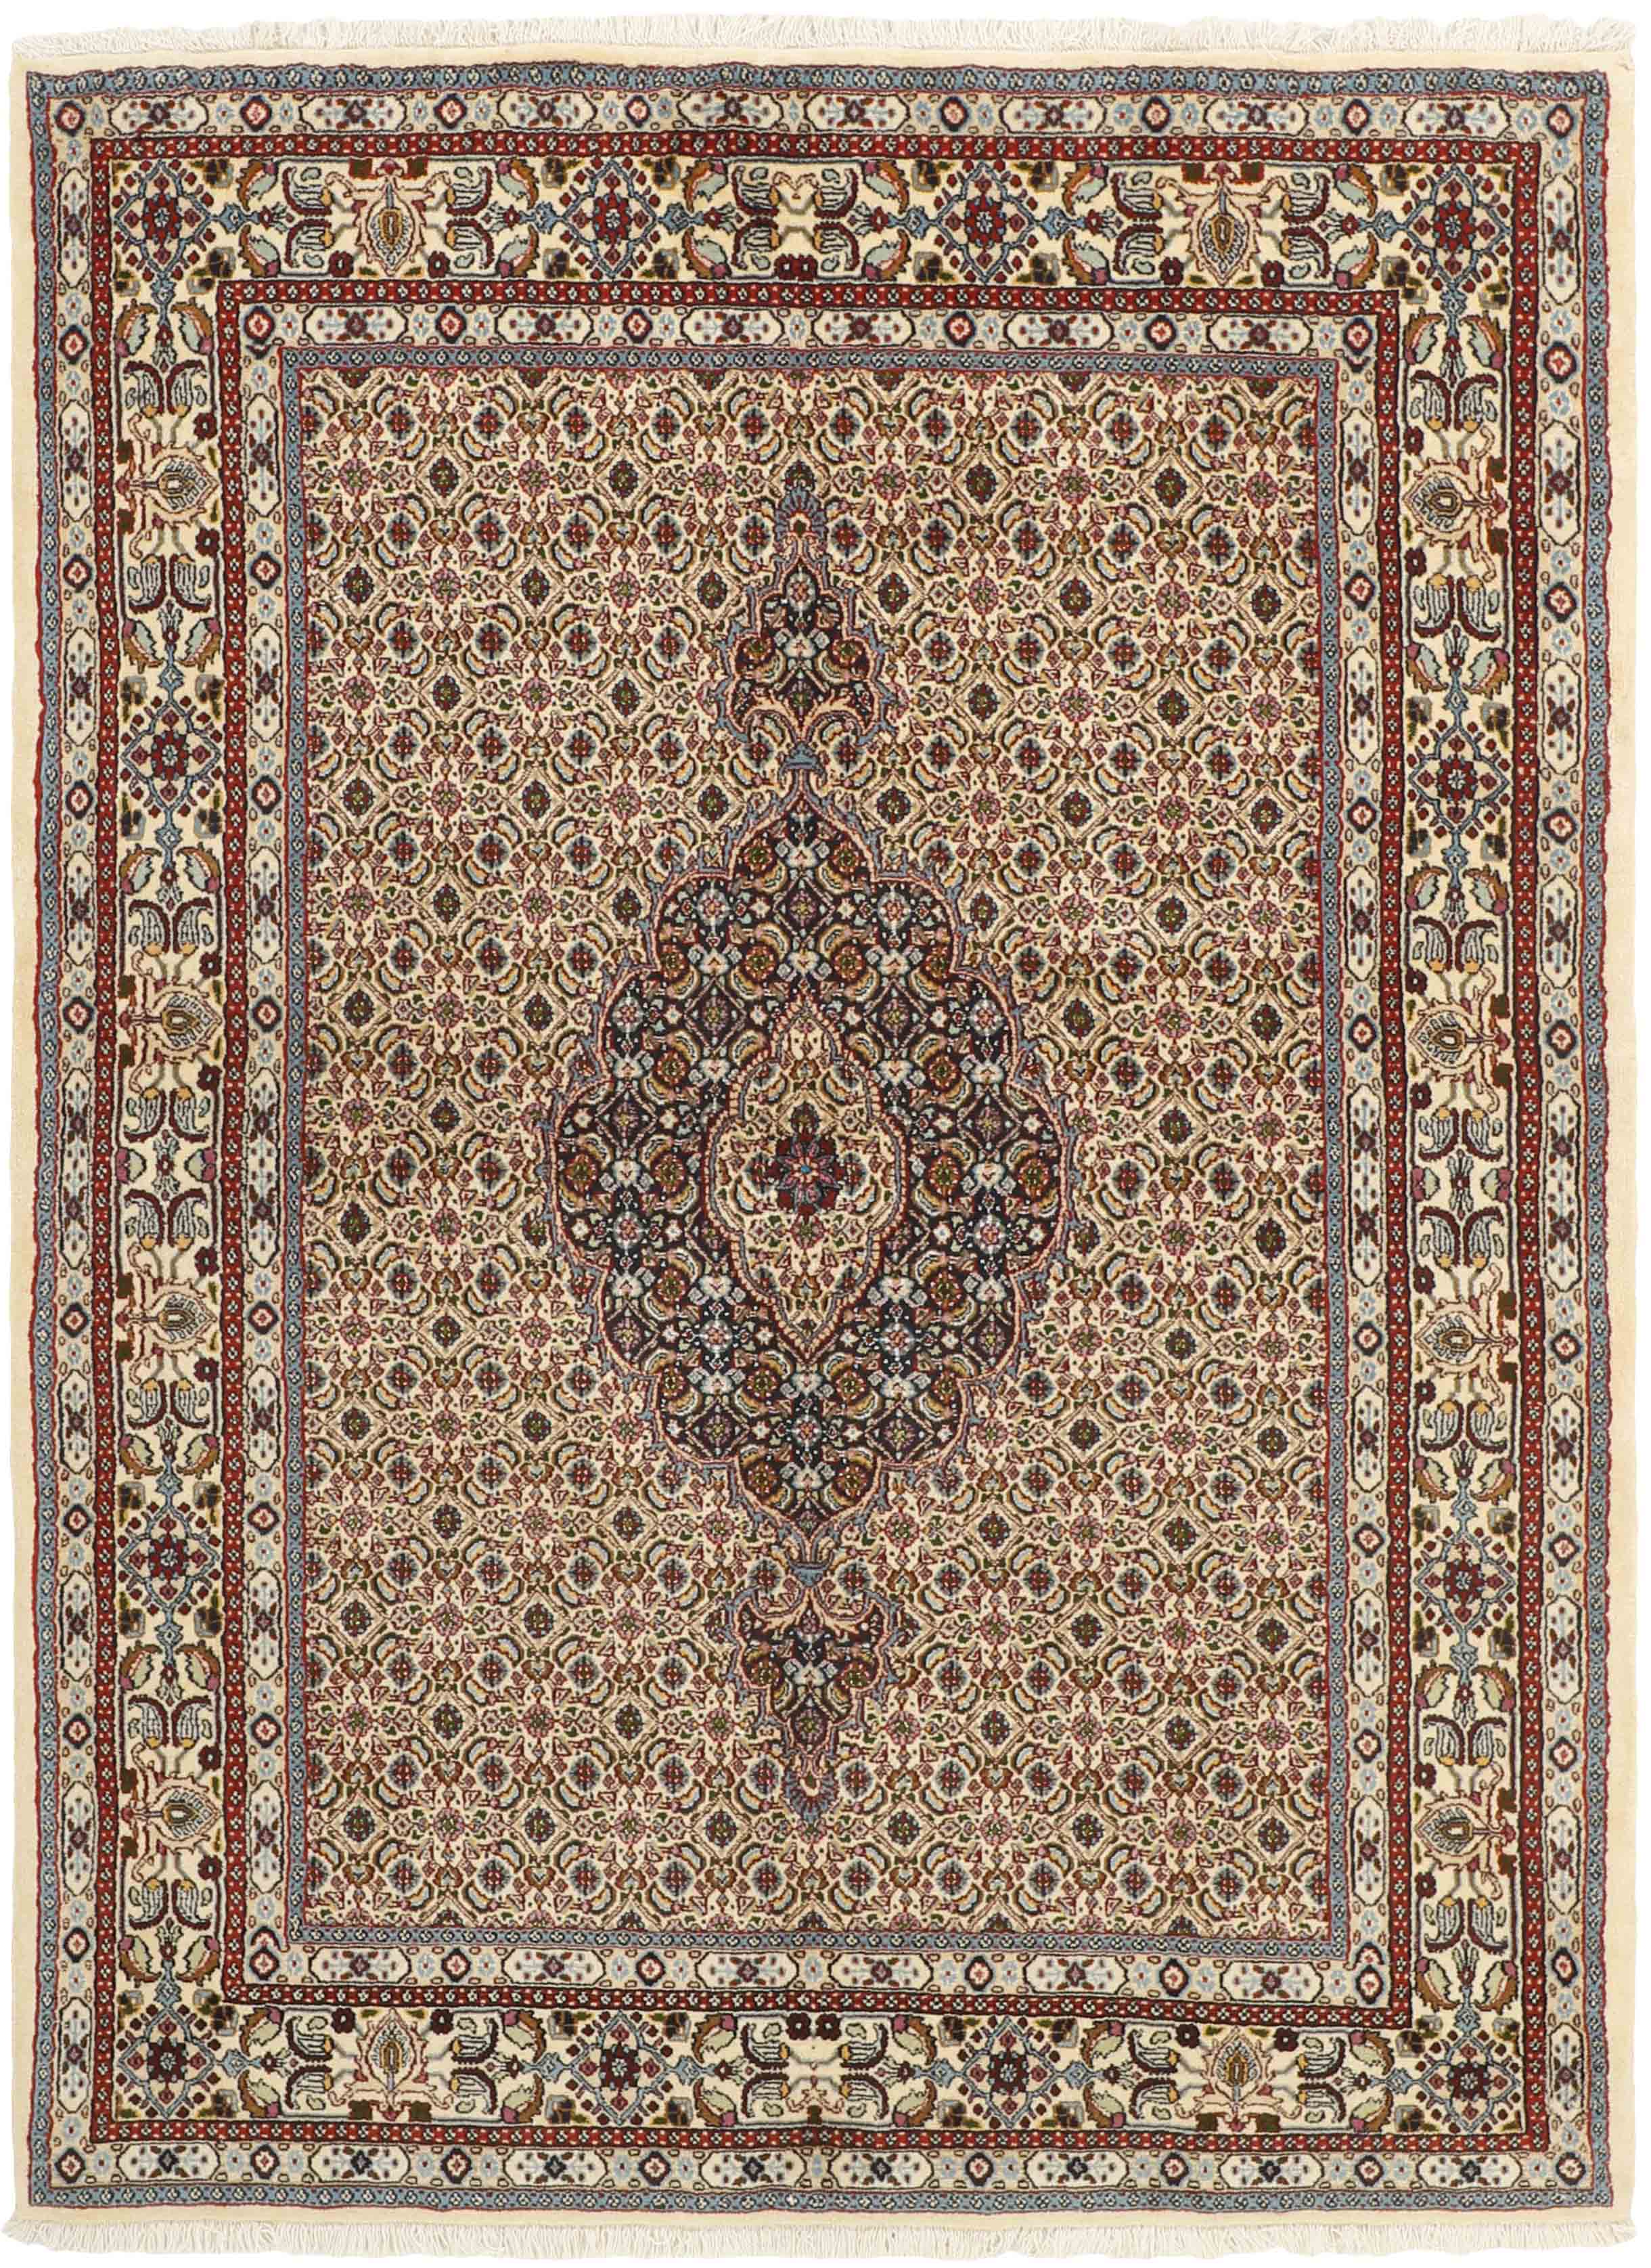 multicolour persian rug with traditional floral pattern in cream, blue and red